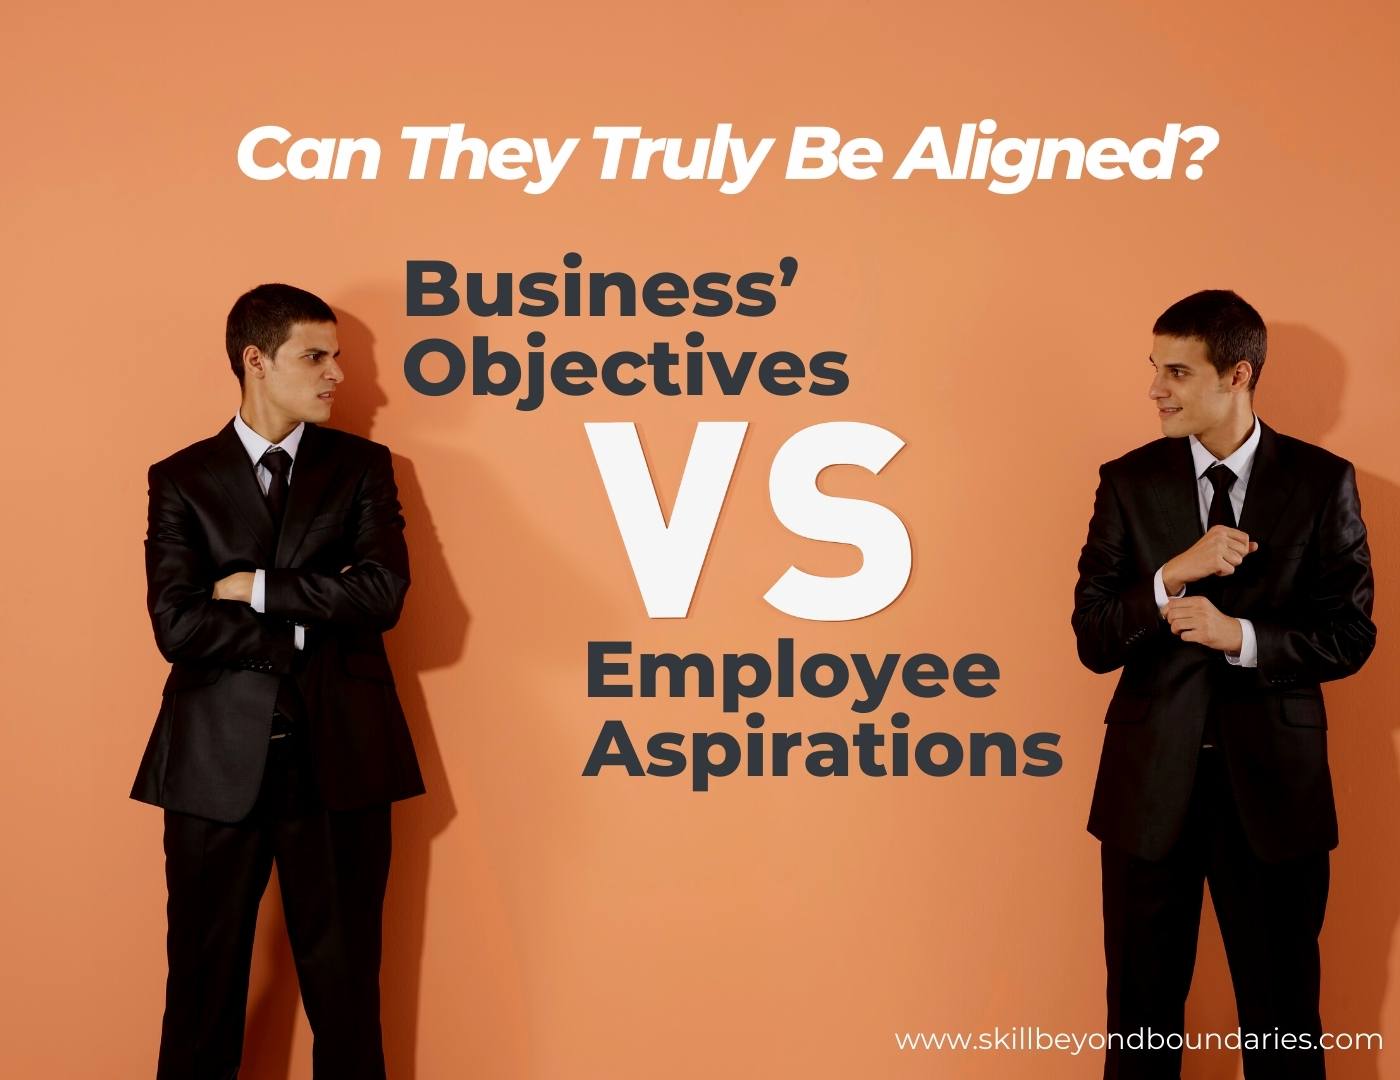 Alignment between business objectives and employee aspirations